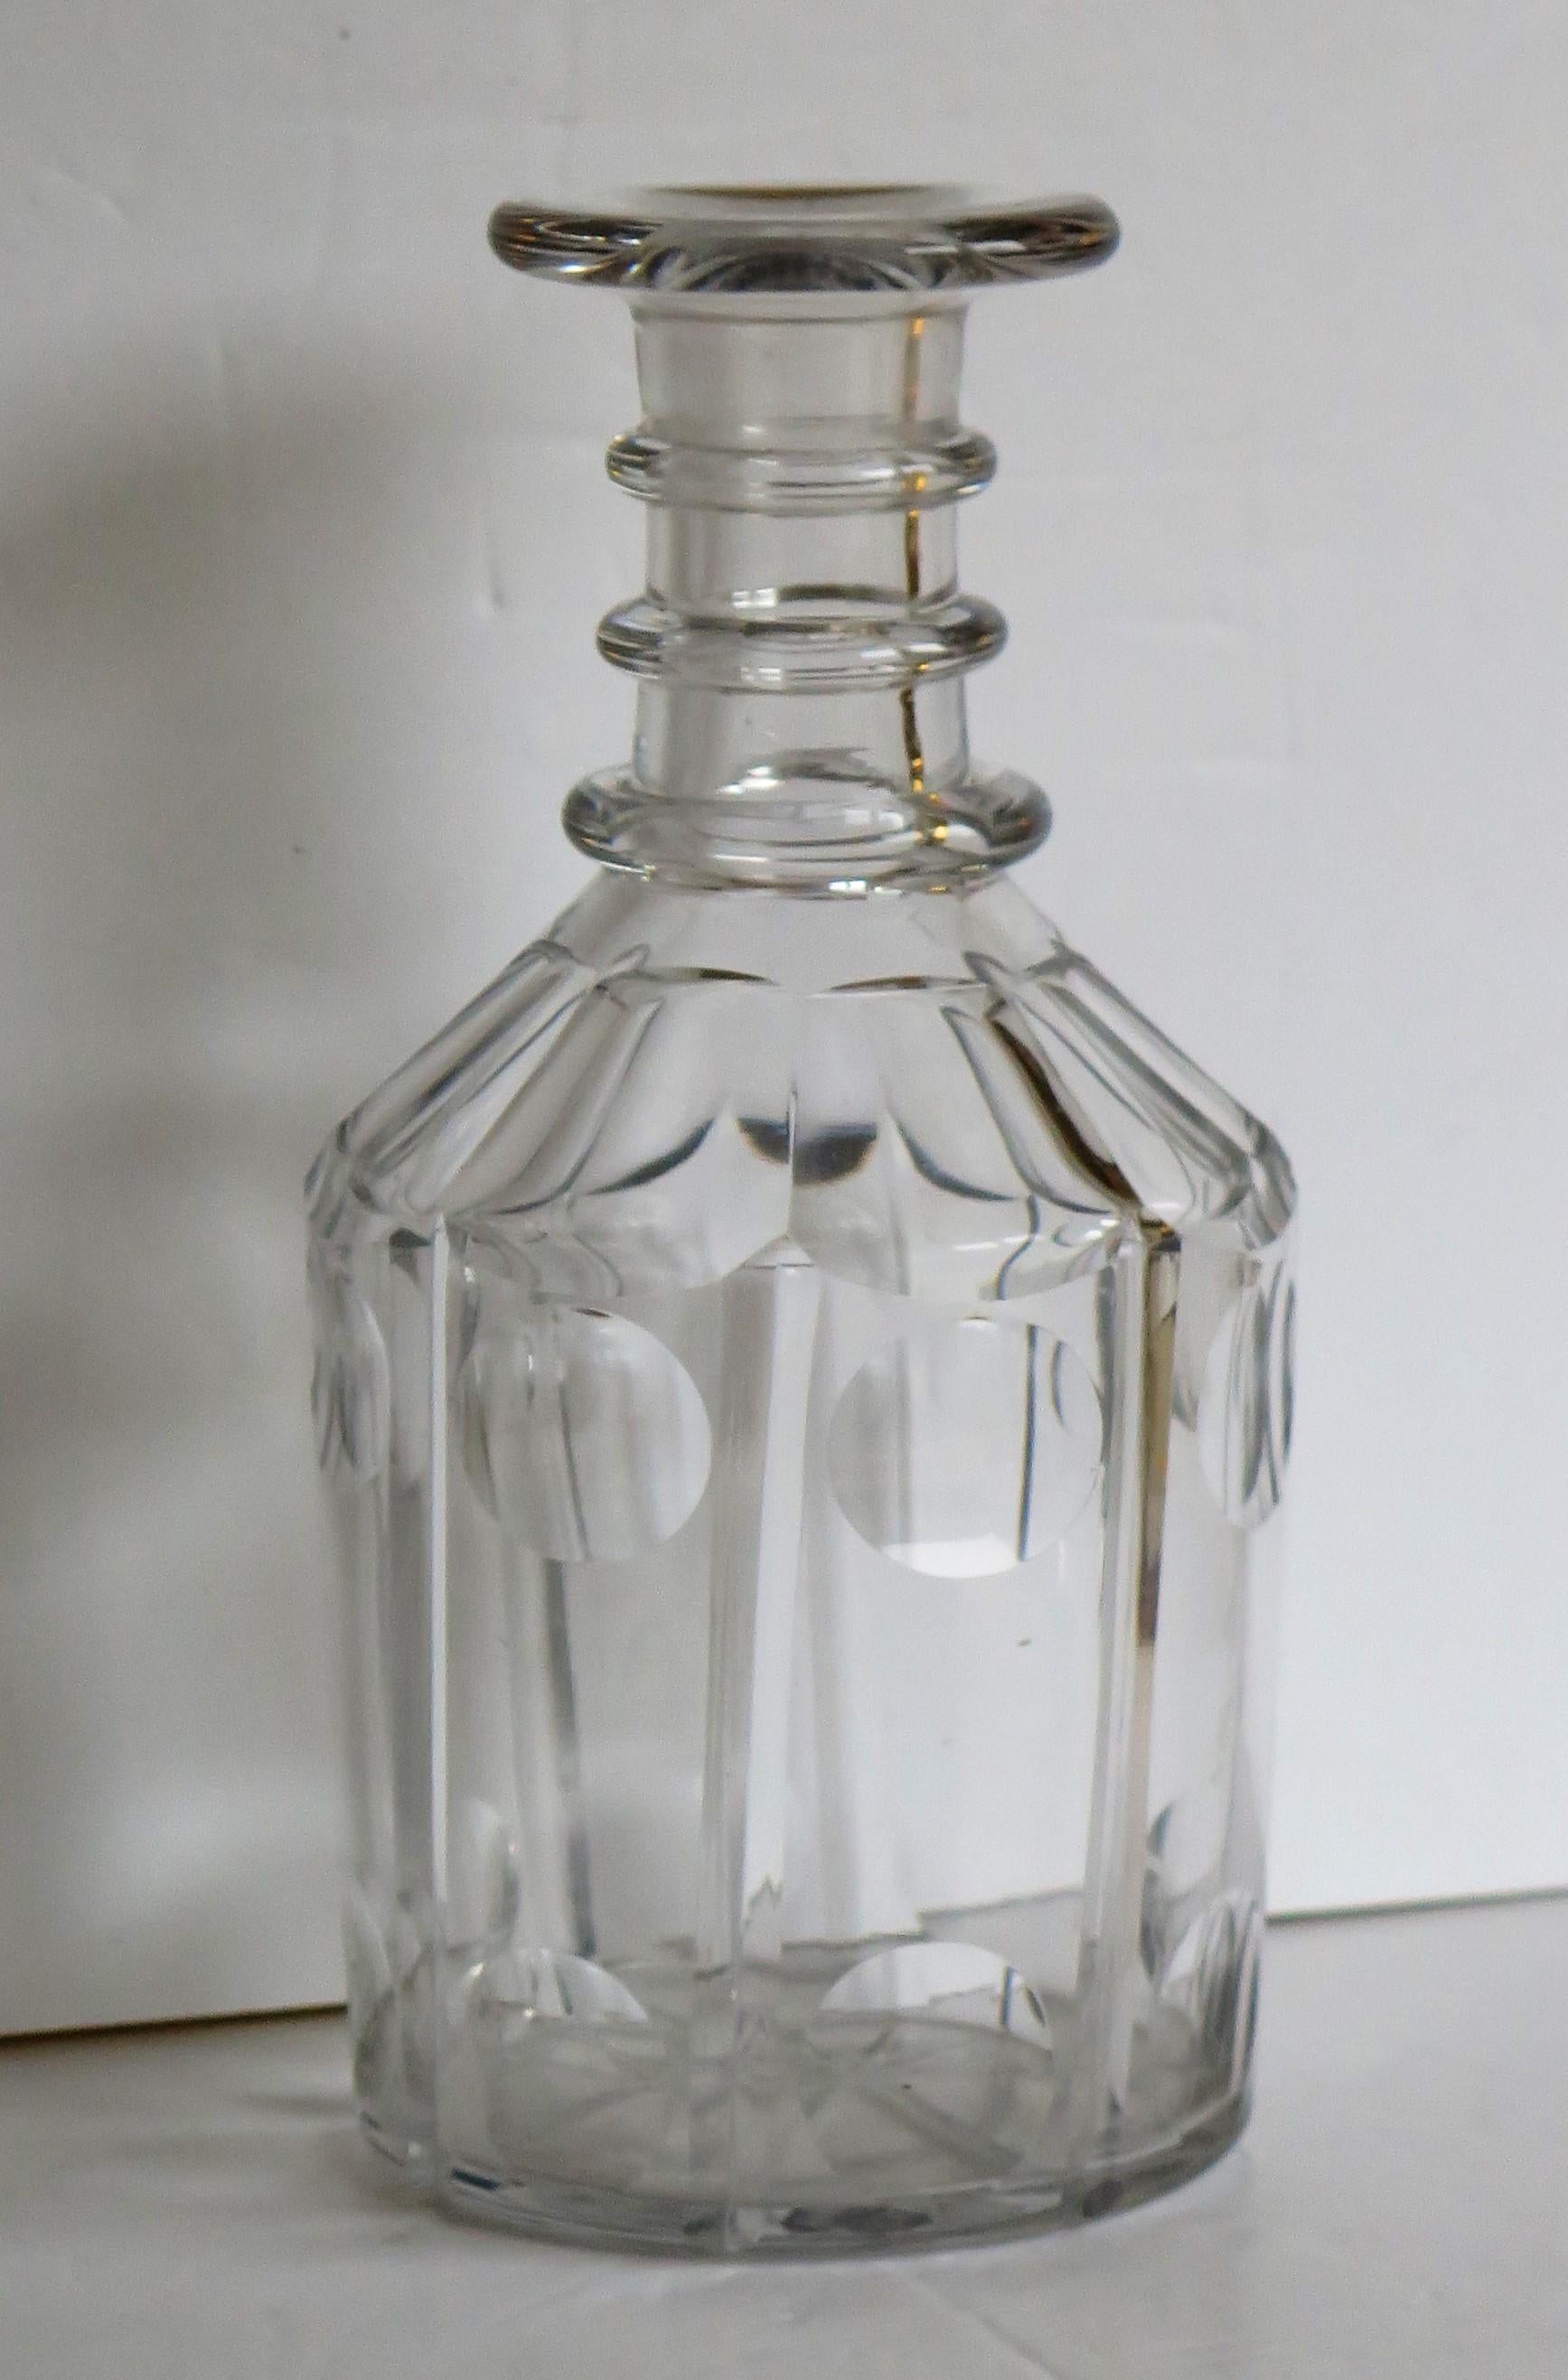 Hand-Crafted Georgian Lead Glass Decanter 3 Neck Rings and Mushroom Stopper, circa 1820